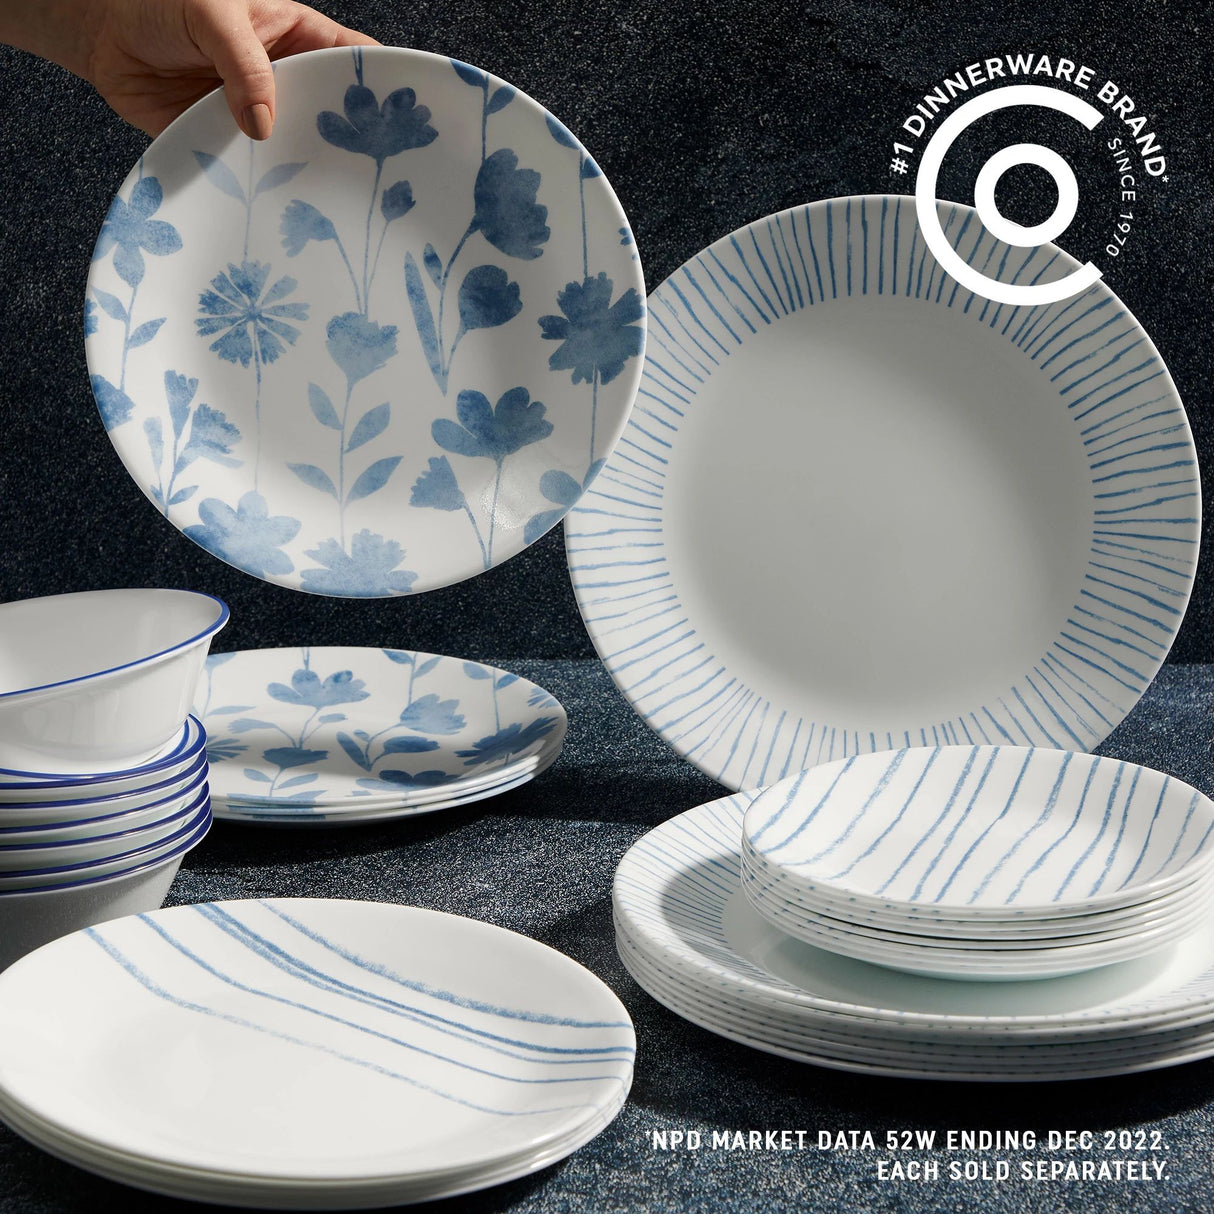  Botanical Stripes complete dinnerwnare set with text #1 dinnerware brand